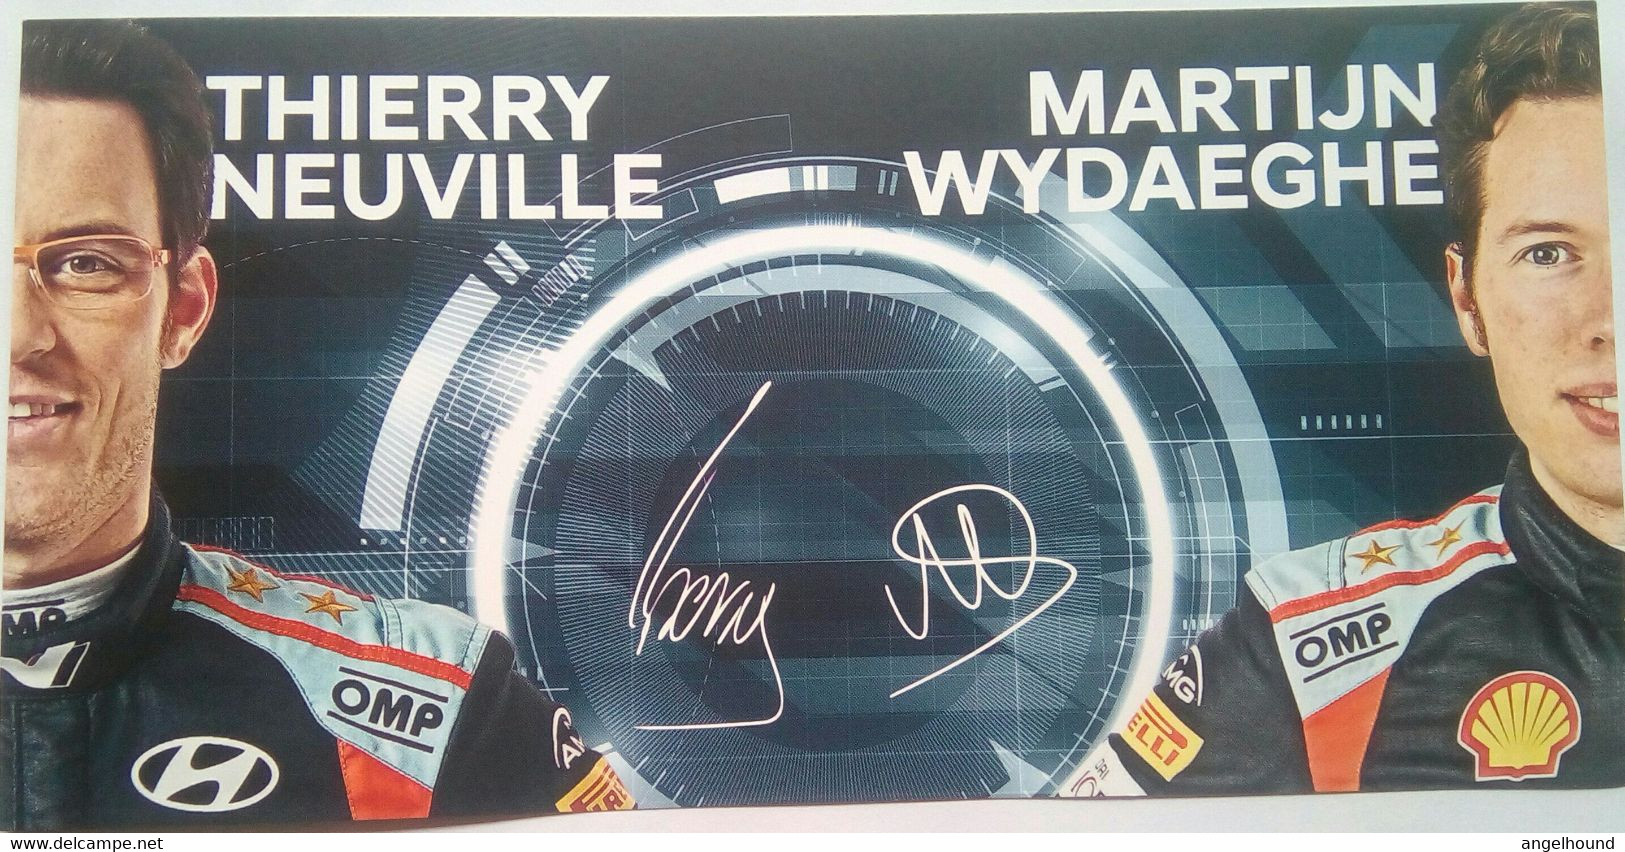 Thierry Neuville And Martijn Wydaeghe ( Hyundai Motorsport Race Car Driver ) - Authographs